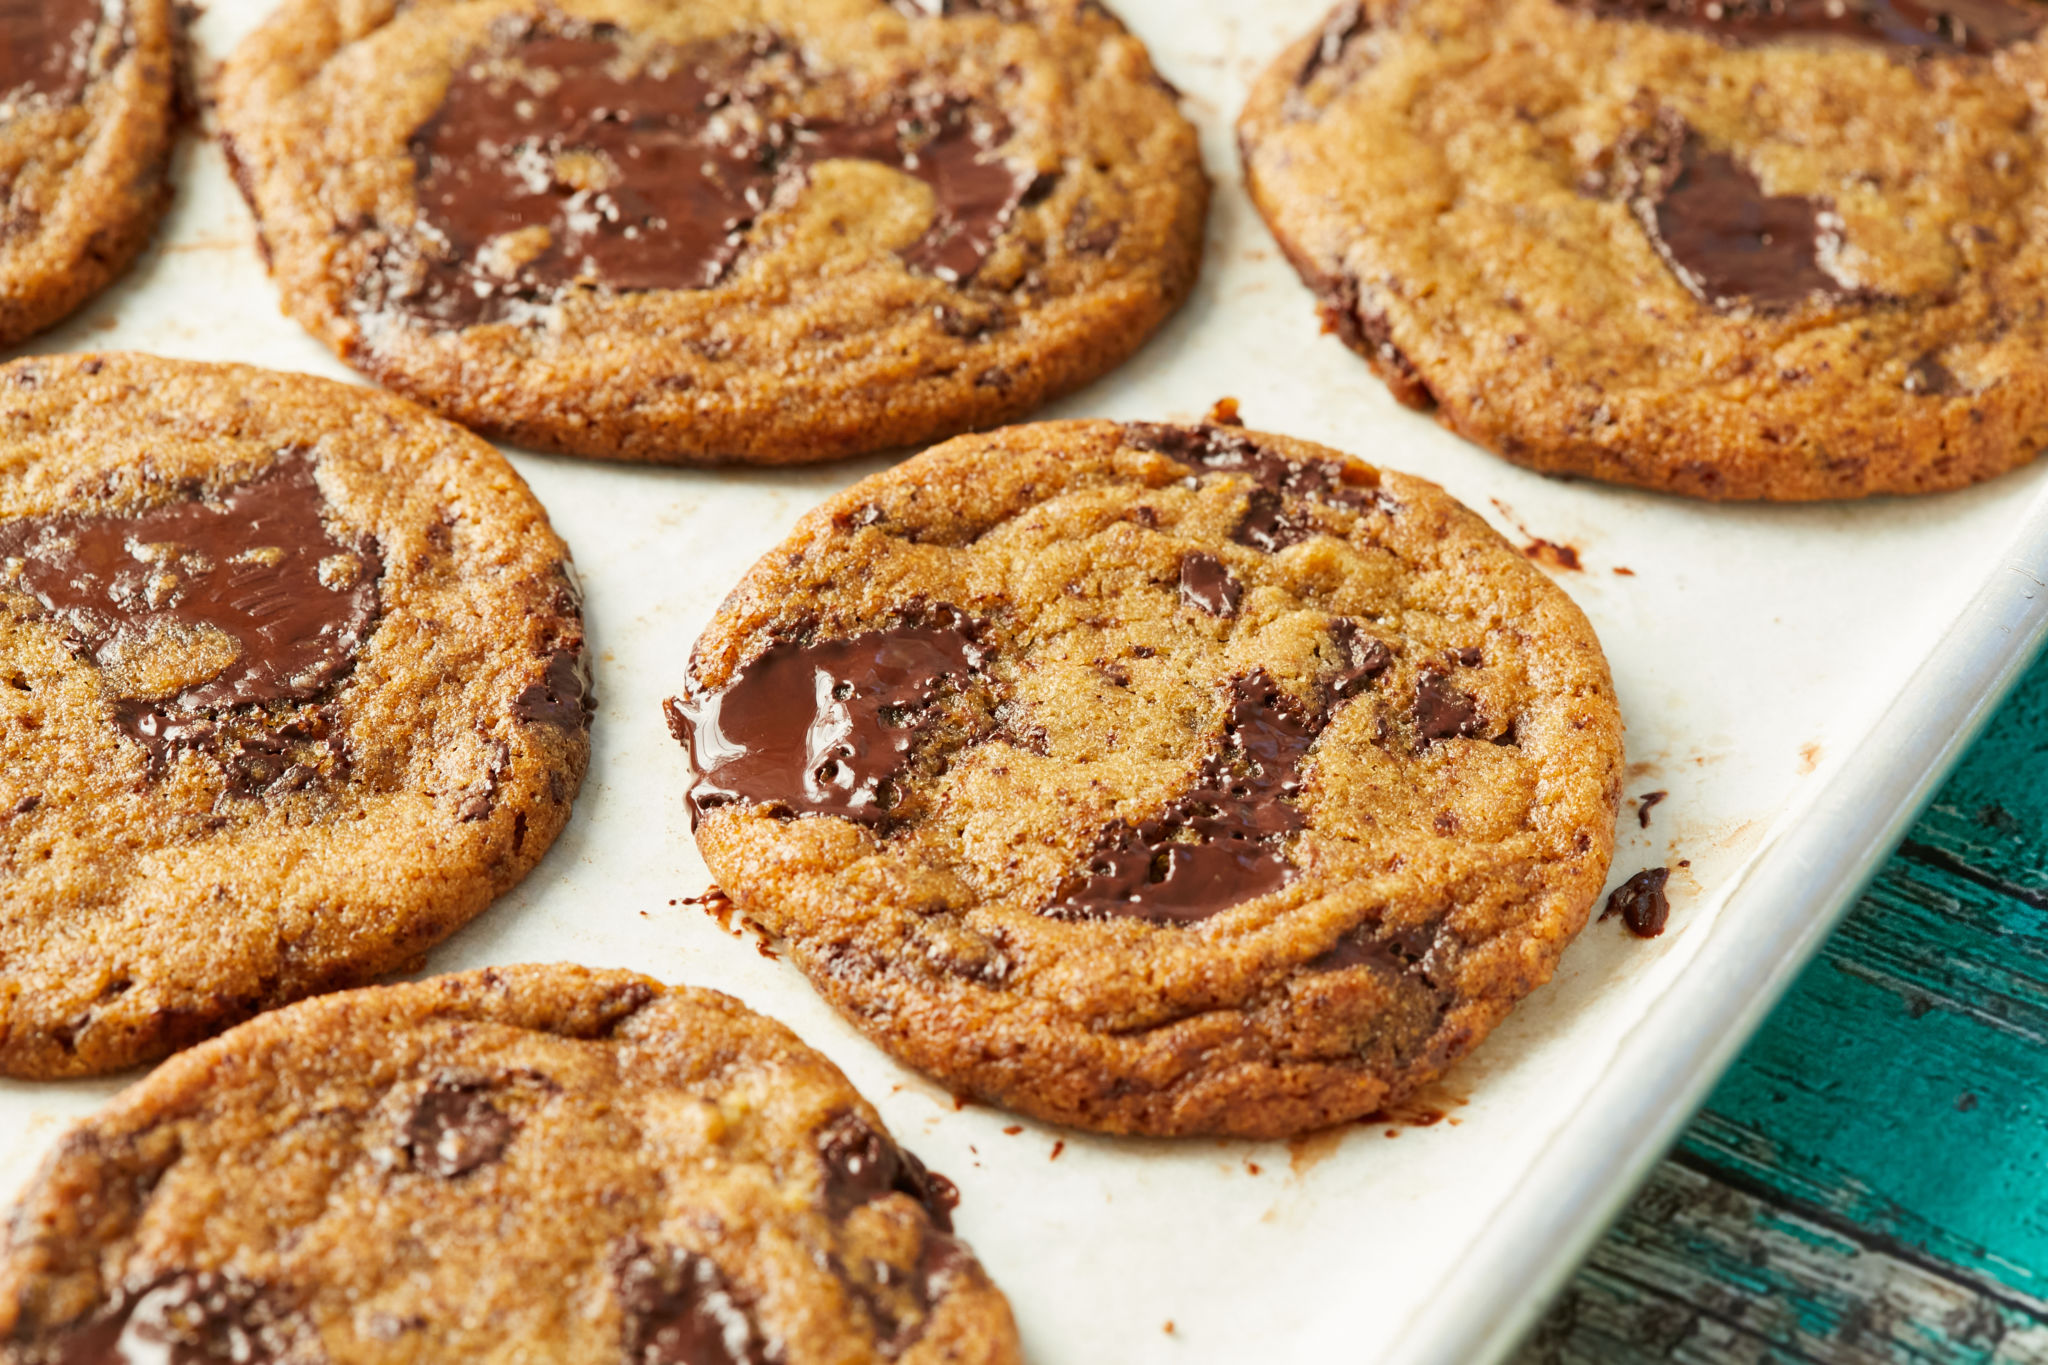 https://www.biggerbolderbaking.com/wp-content/uploads/2021/01/Chewy-Chocolate-Chip-Cookie-Thumbnail2-scaled.jpg